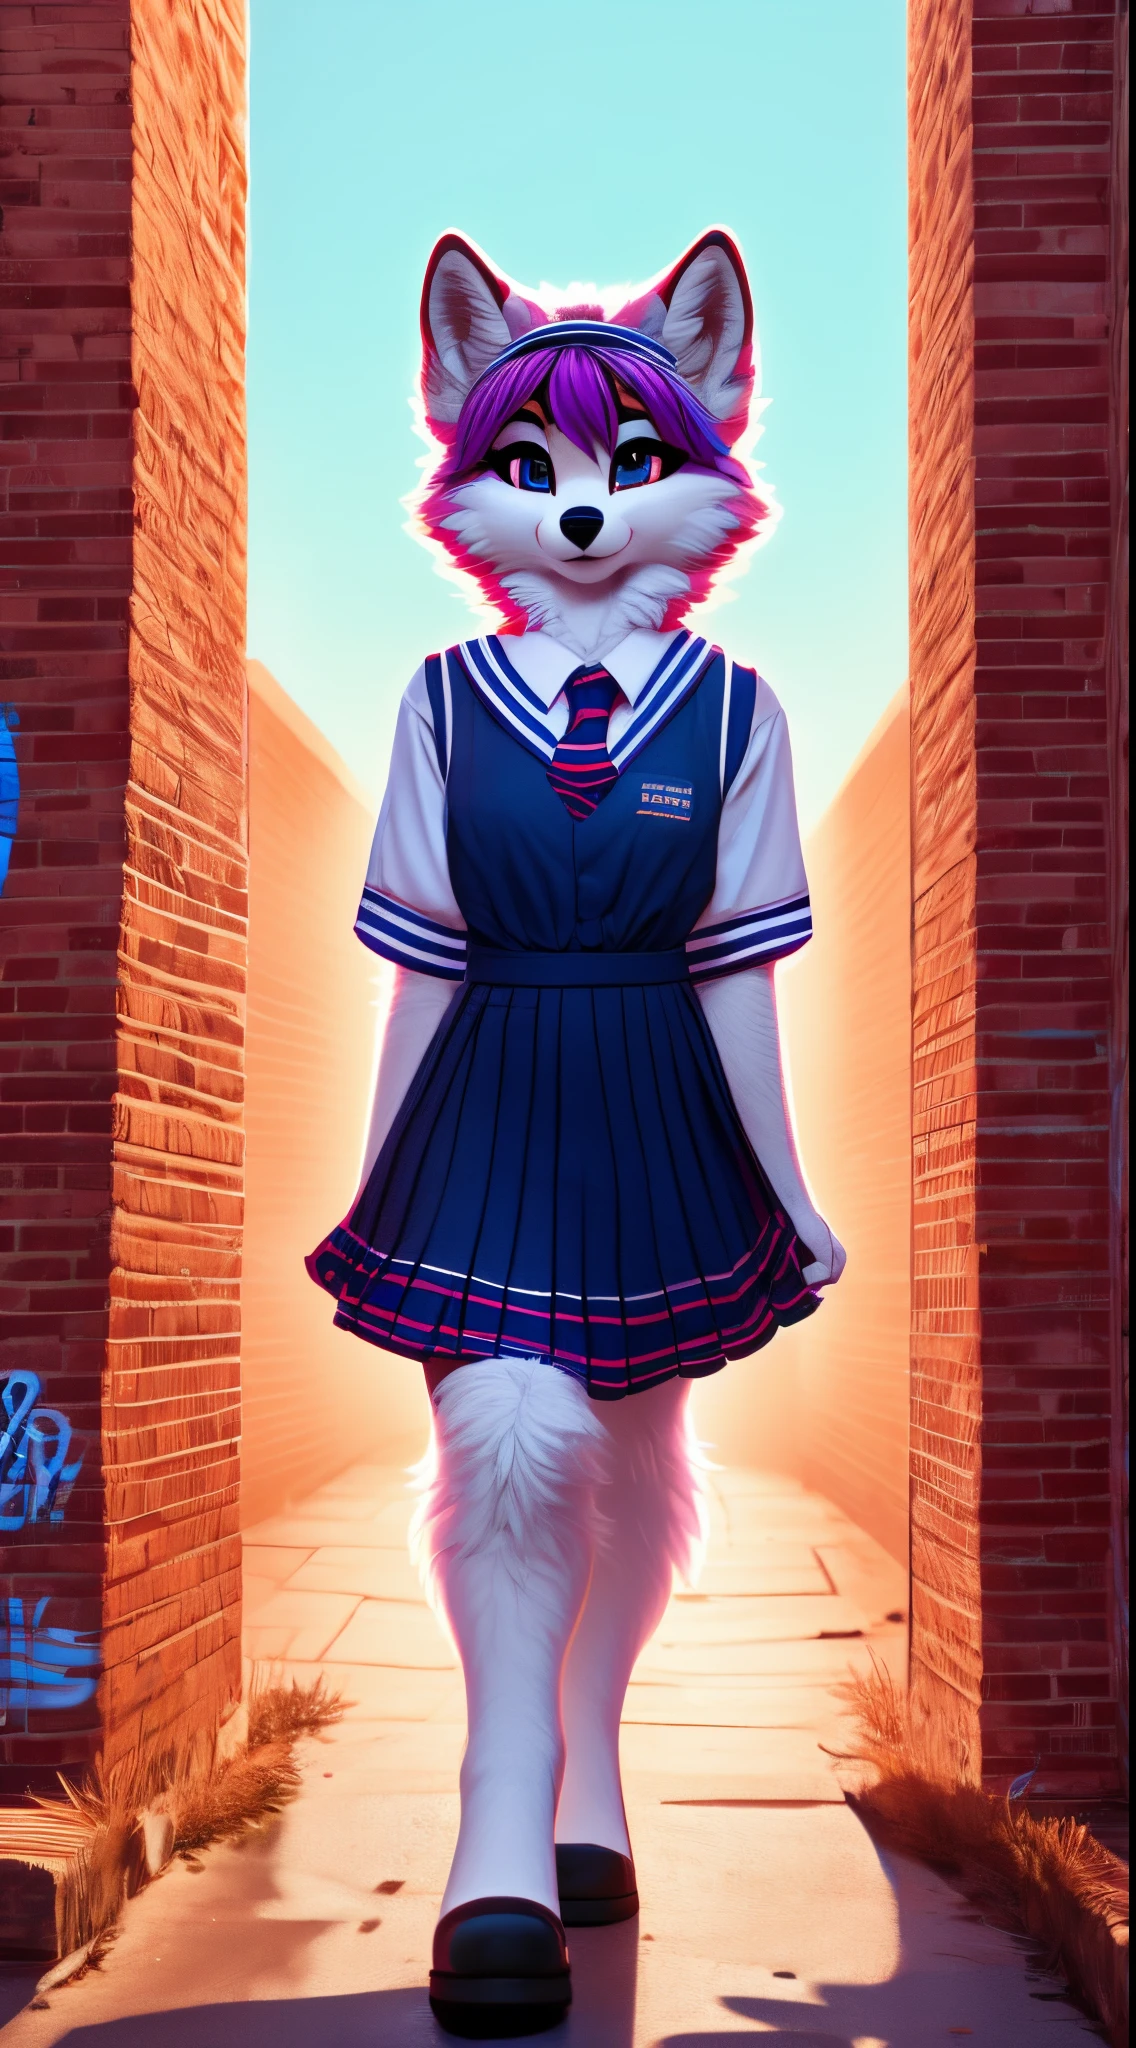 A unique and diverse prompt that showcases a furry girl wearing a school uniform, standing in front of a vibrant graffiti-covered brick wall. The AI platform should render the girl with soft, fluffy fur and the  with intricate details, while the brick wall is depicted with bold and colorful strokes.